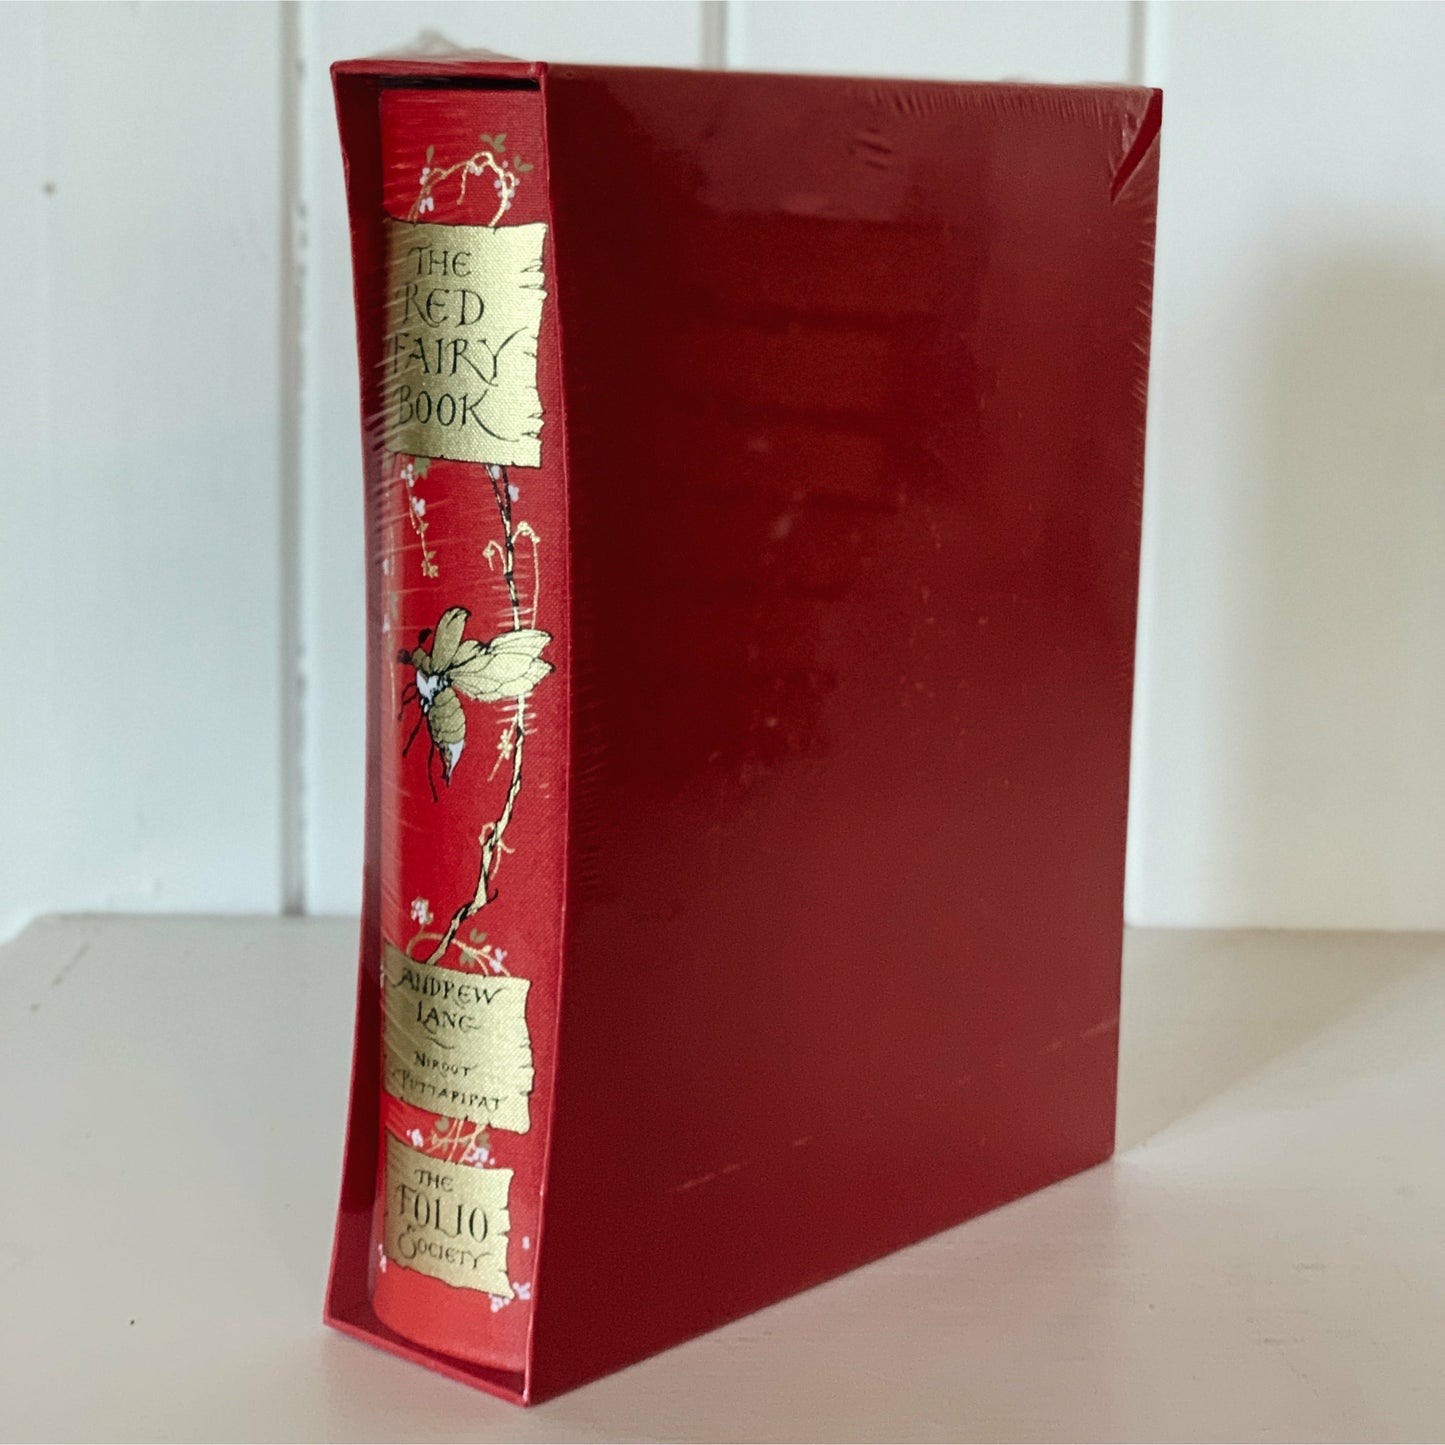 The Red Fairy Book Folio Society Limited Edition Hardcover in Slipcover New Unopened